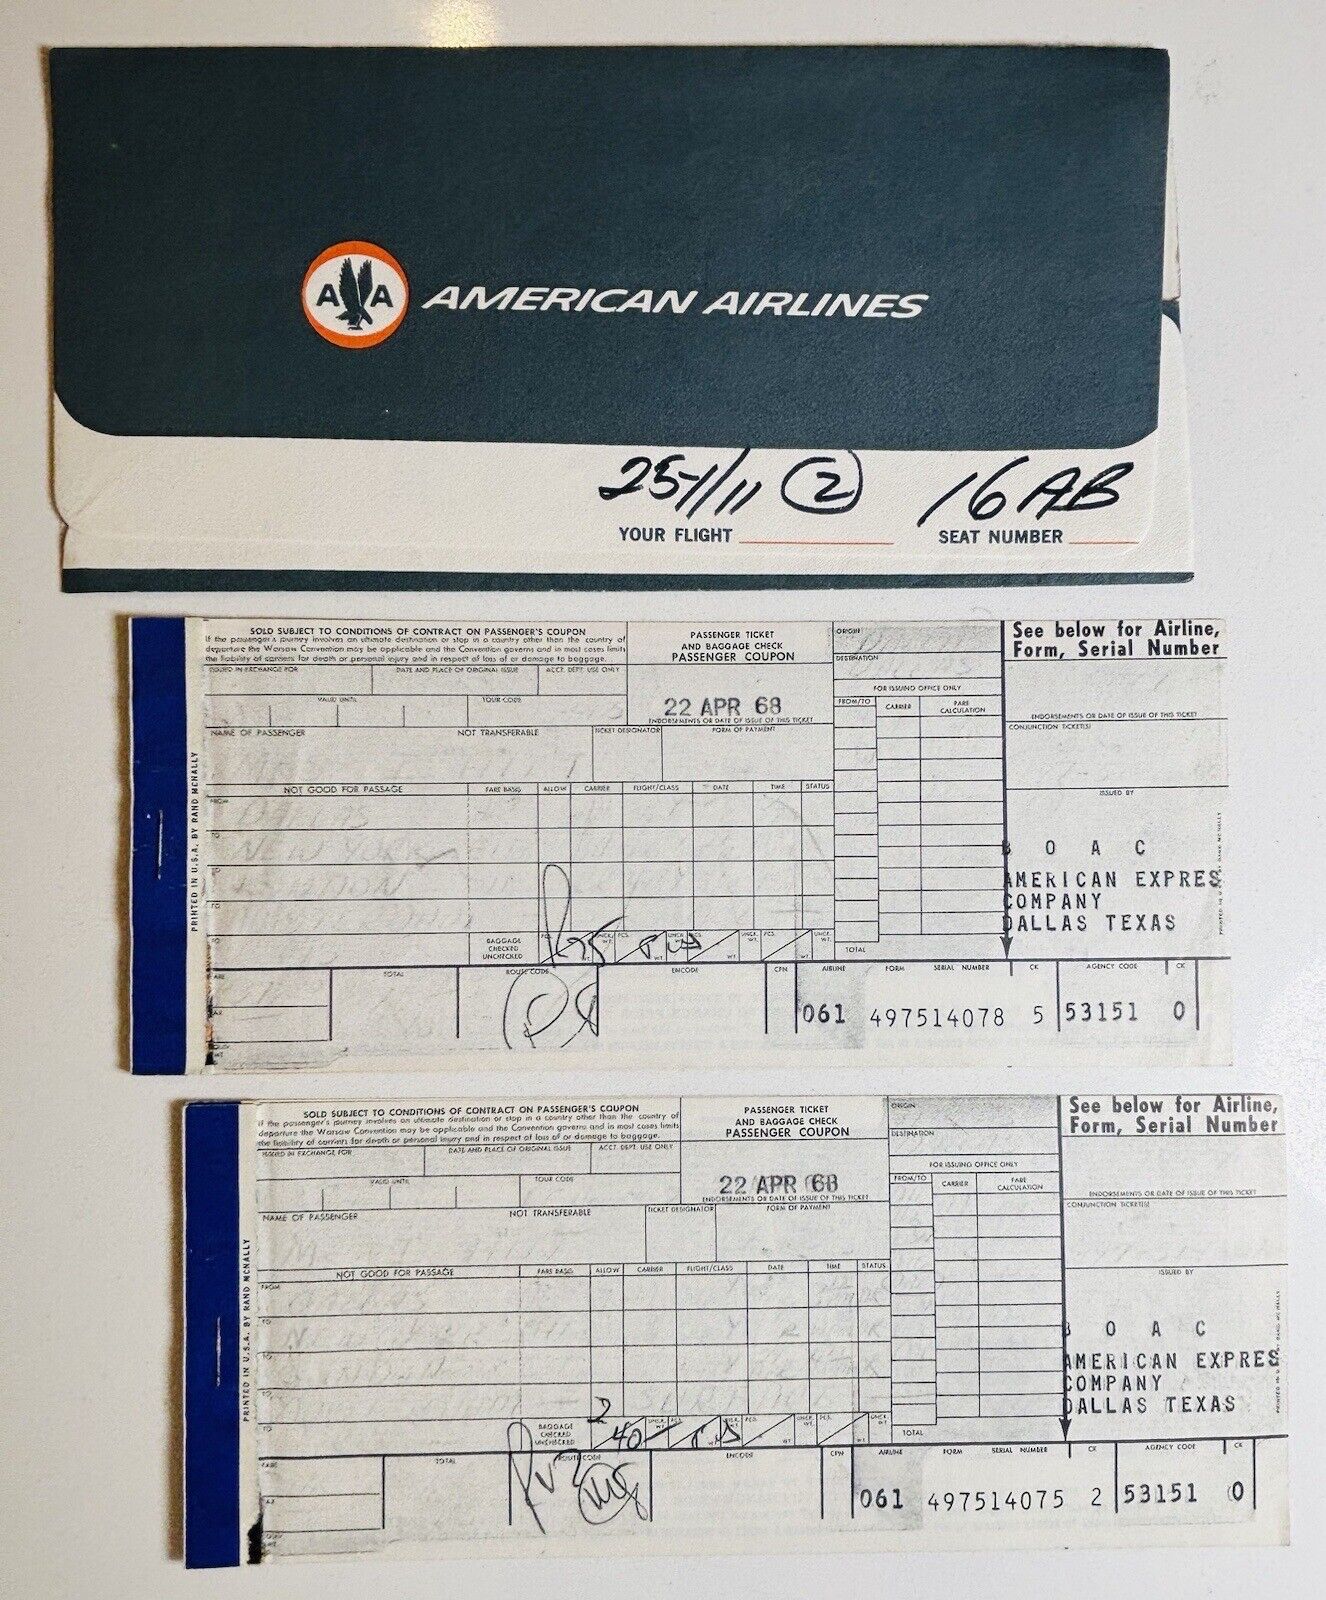 AIRLINE TICKET & JACKET: 1968 American Airlines - Dallas NY London Amsterdam